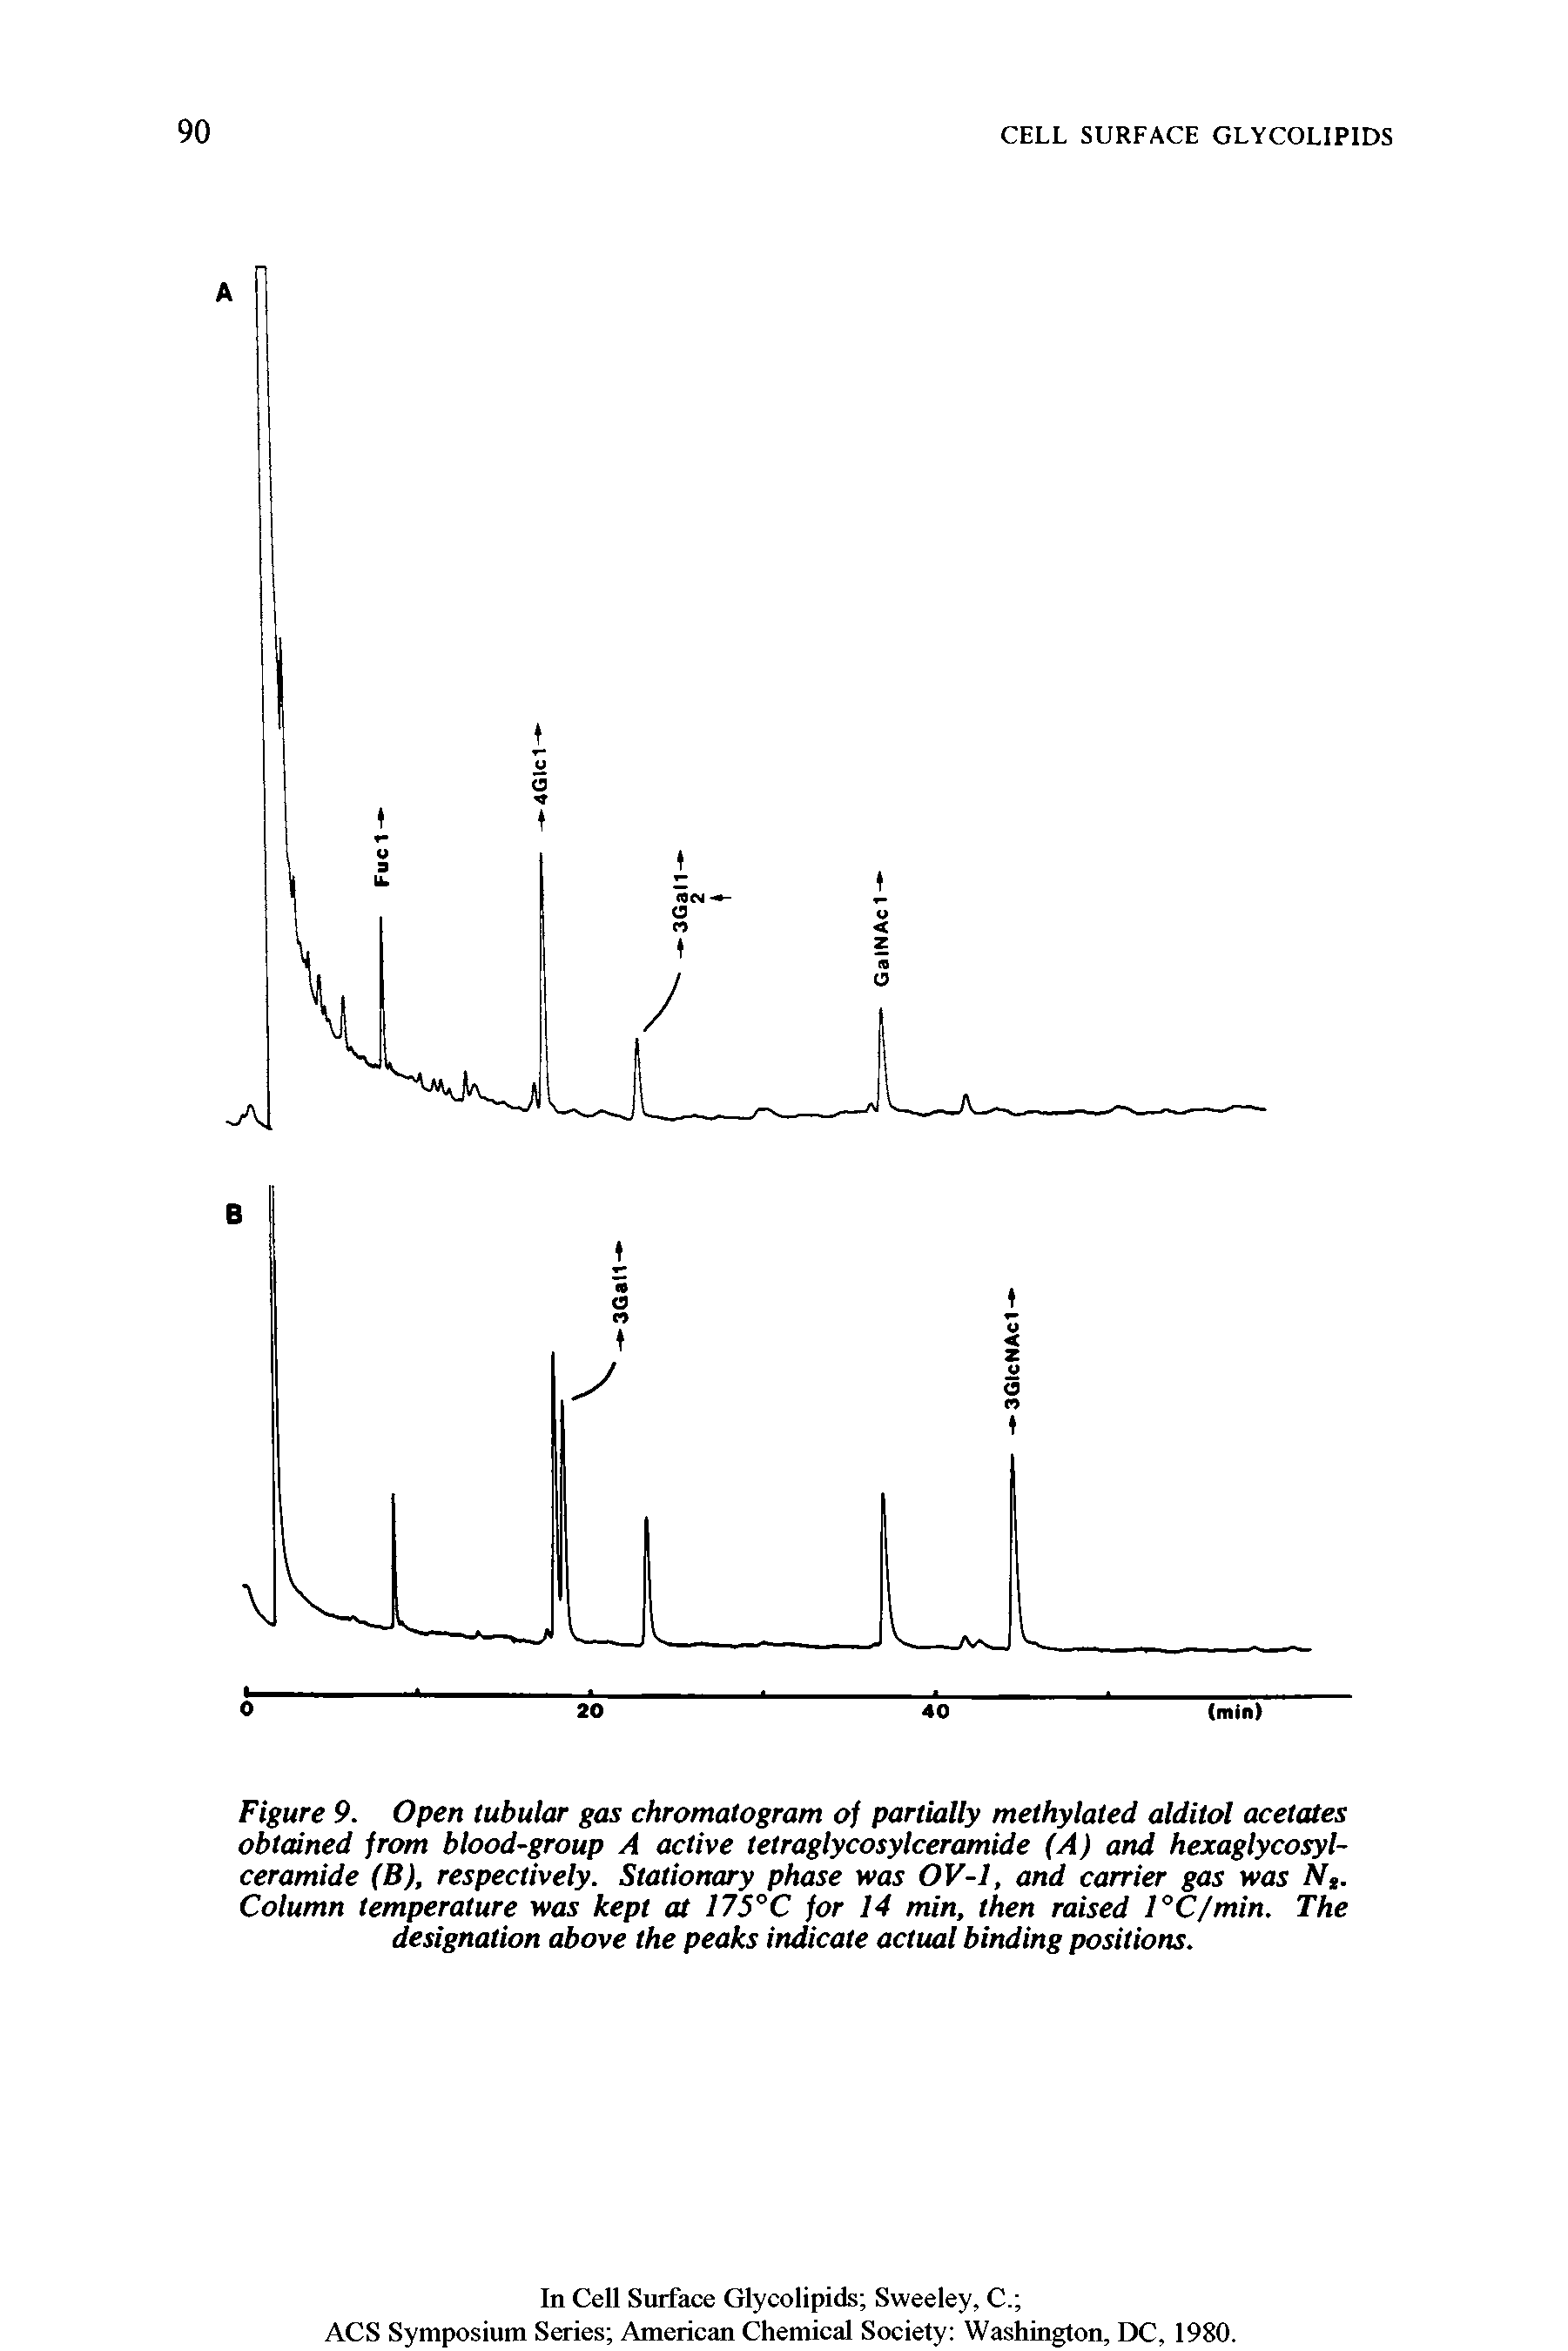 Figure 9. Open tubular gas chromatogram of partially methylated alditol acetates obtained from blood-group A active tetraglycosylceramide (A) and hexaglycosyl-ceramide (B), respectively. Stationary phase was OV-1, and carrier gas was Ns. Column temperature was kept at 175°C for 14 min, then raised l°C/min. The designation above the peaks indicate actual binding positions.